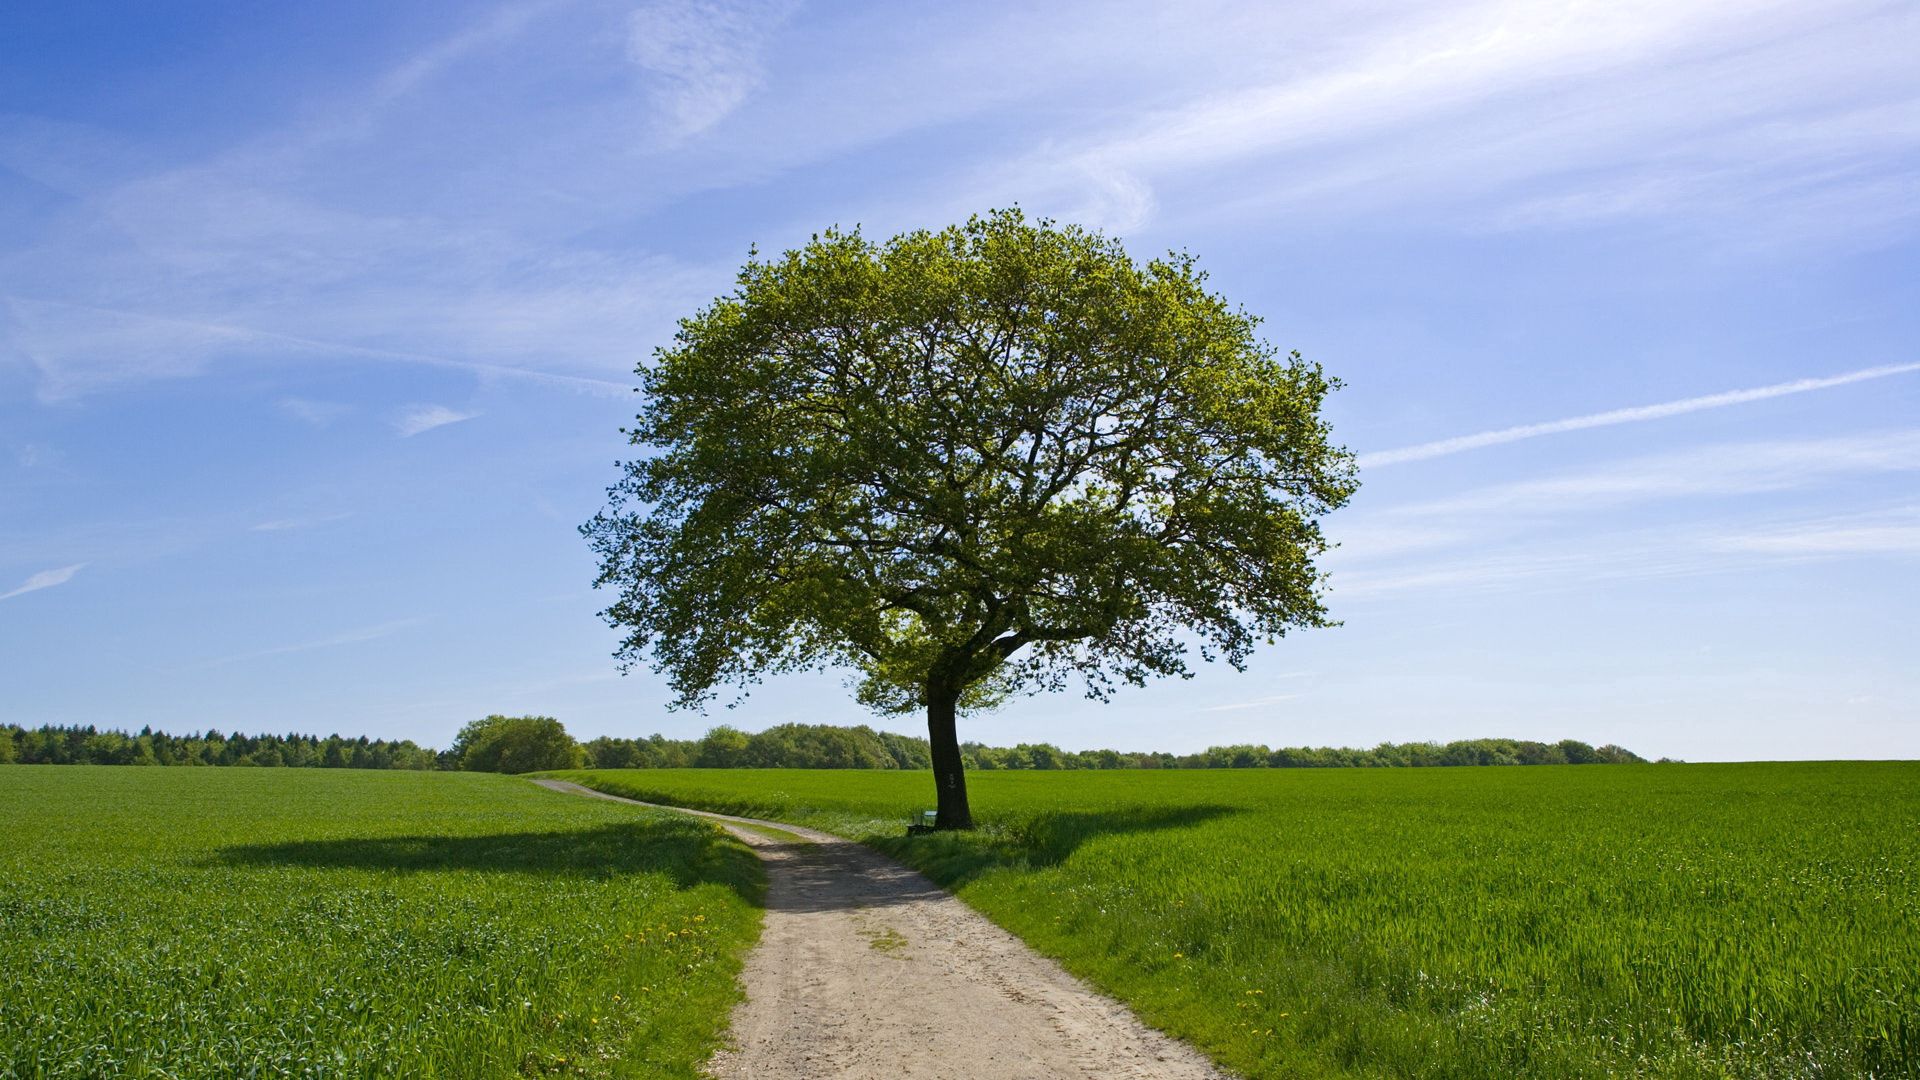 Popular Tree Image for Phone